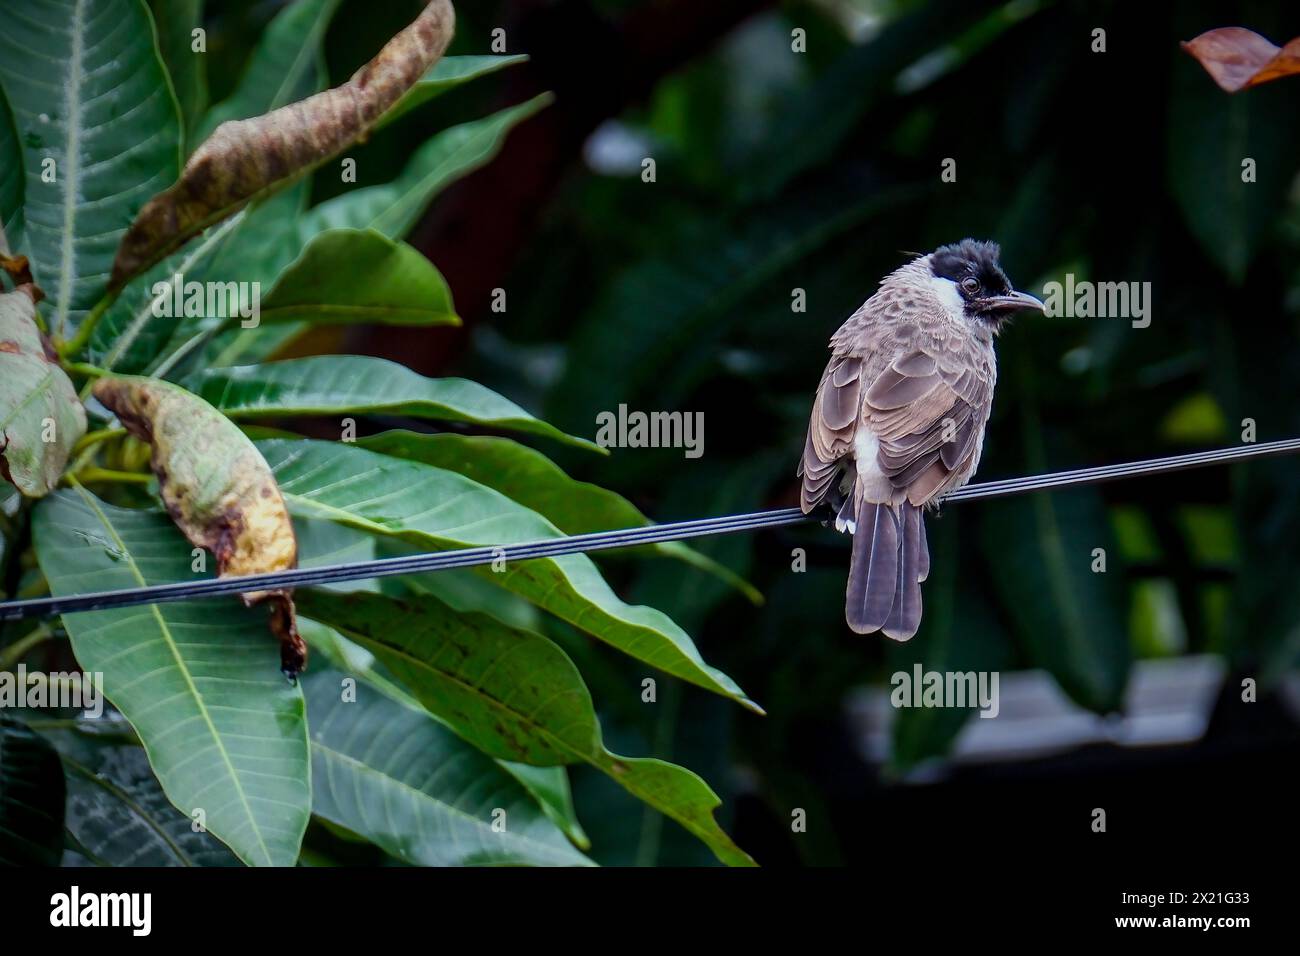 A single Dark-capped Bulbul on a blurred background Stock Photo